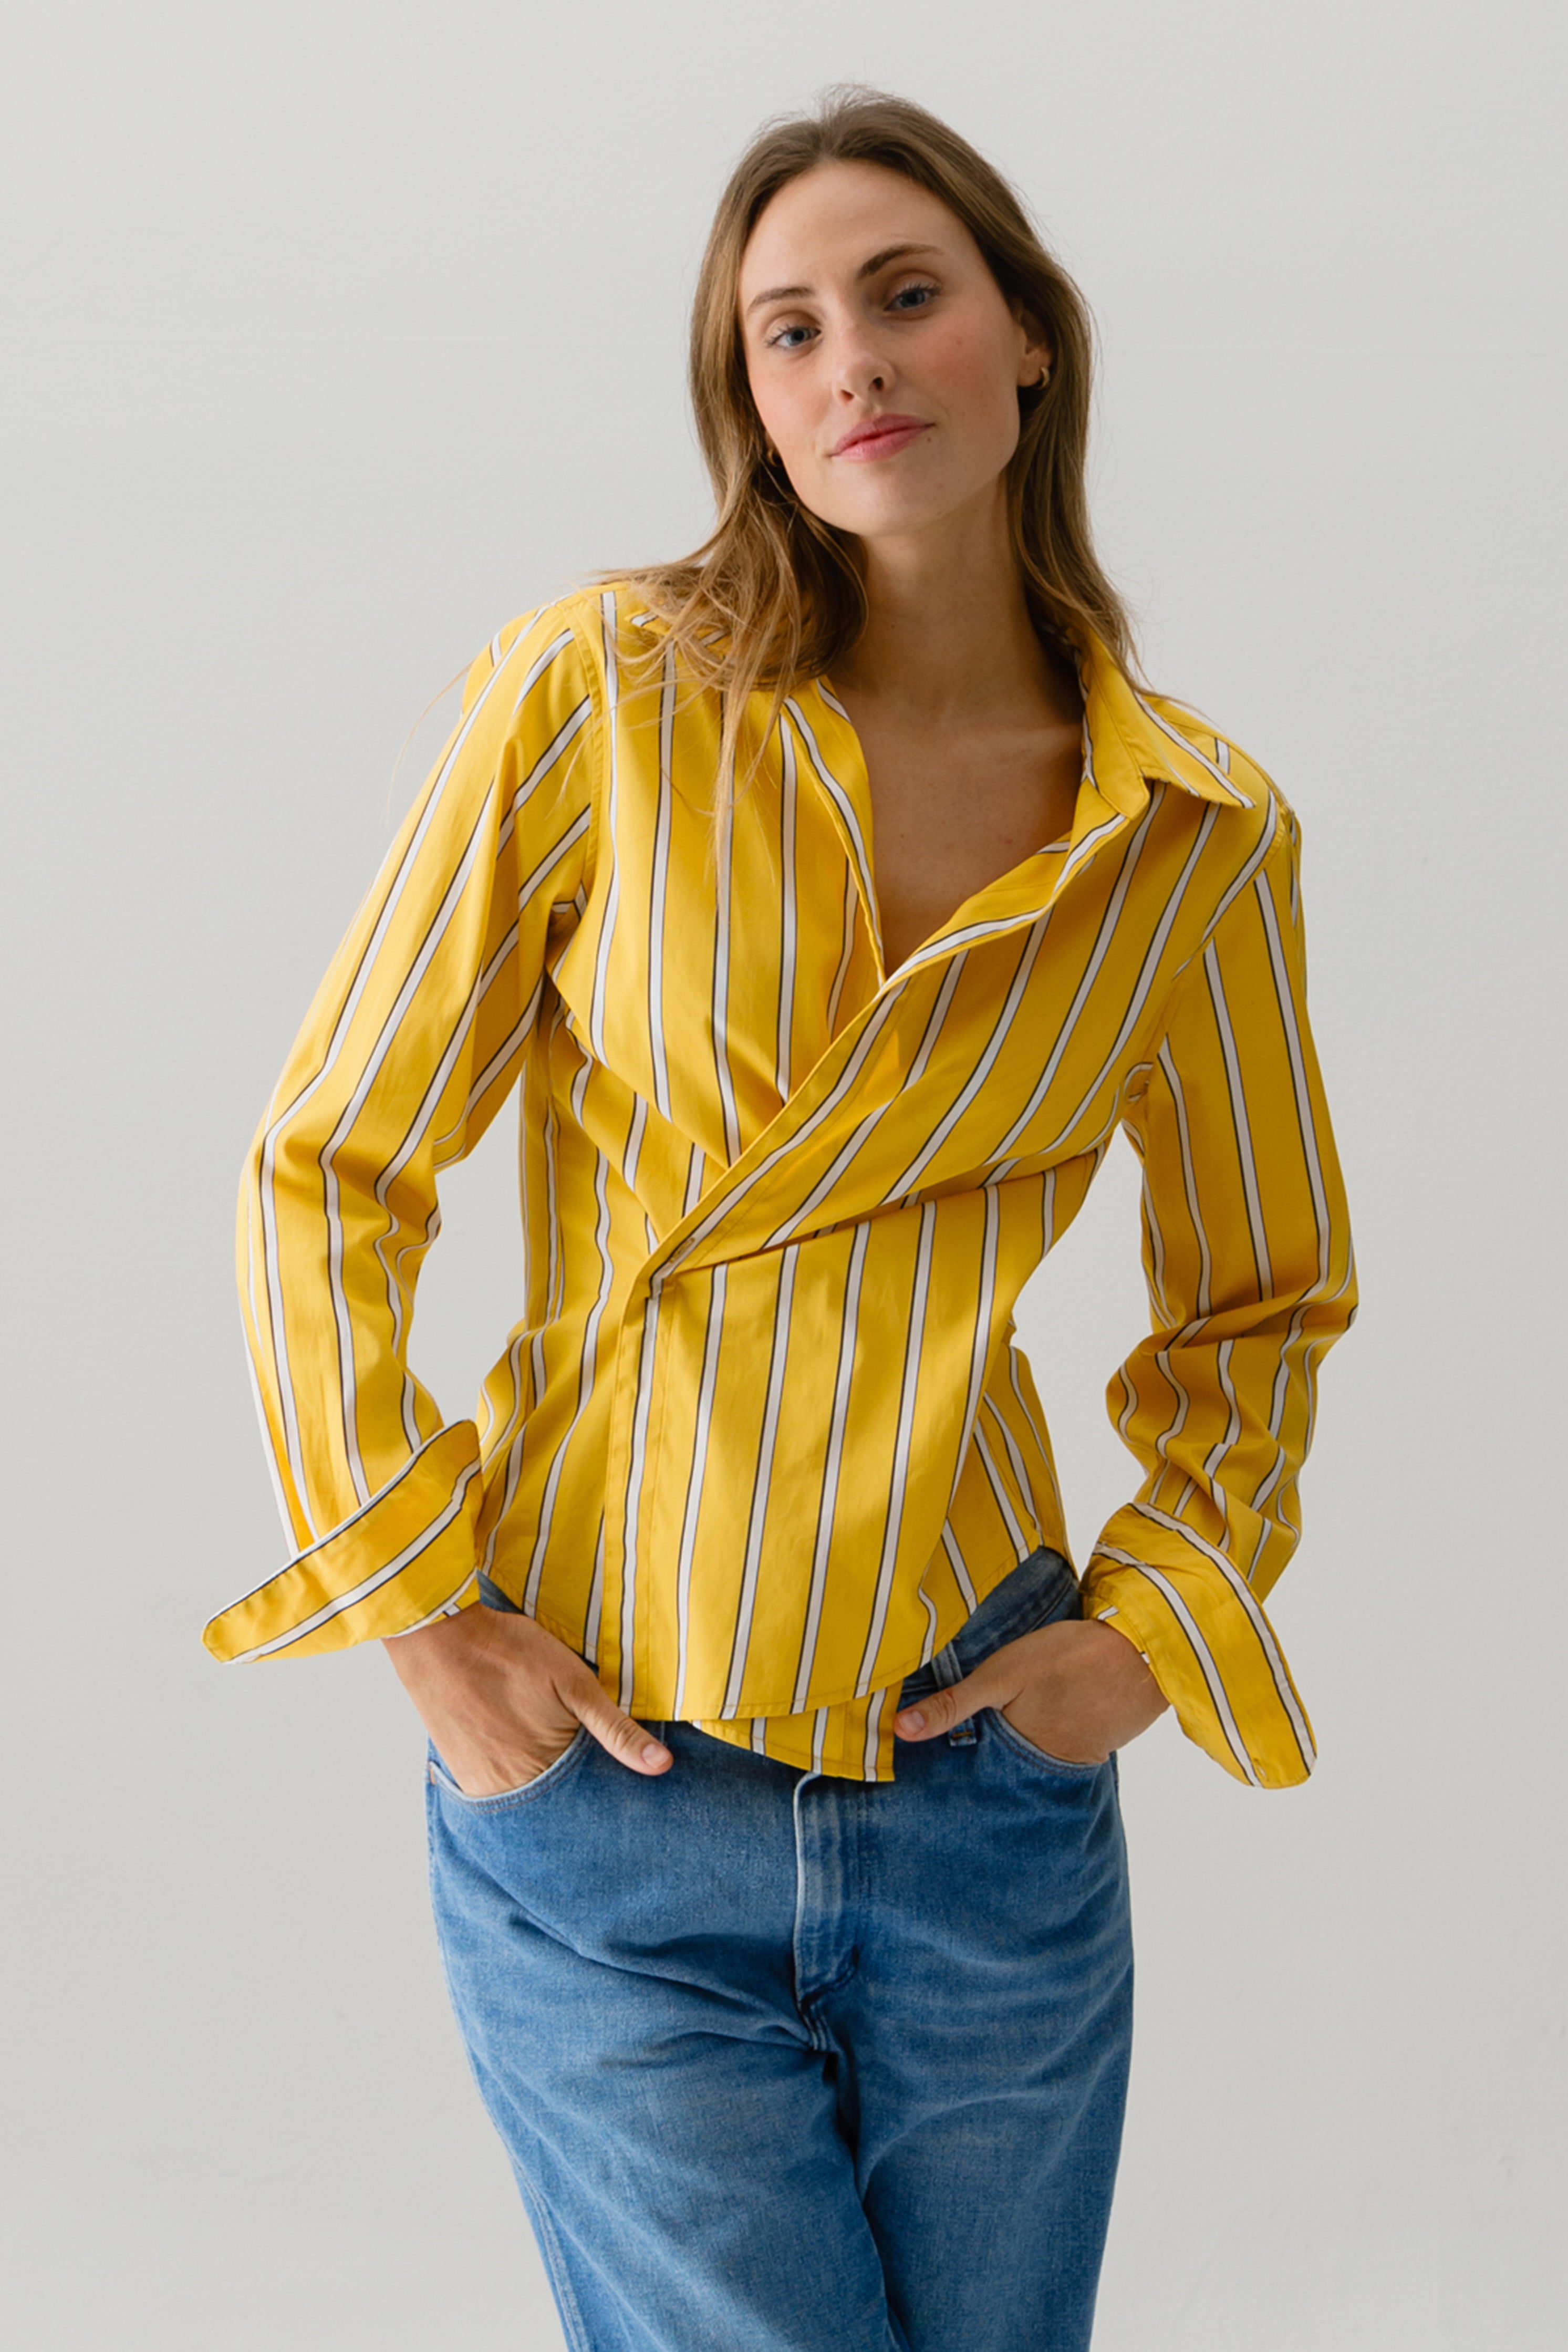 The FITTED Shirt, Sun Stripe